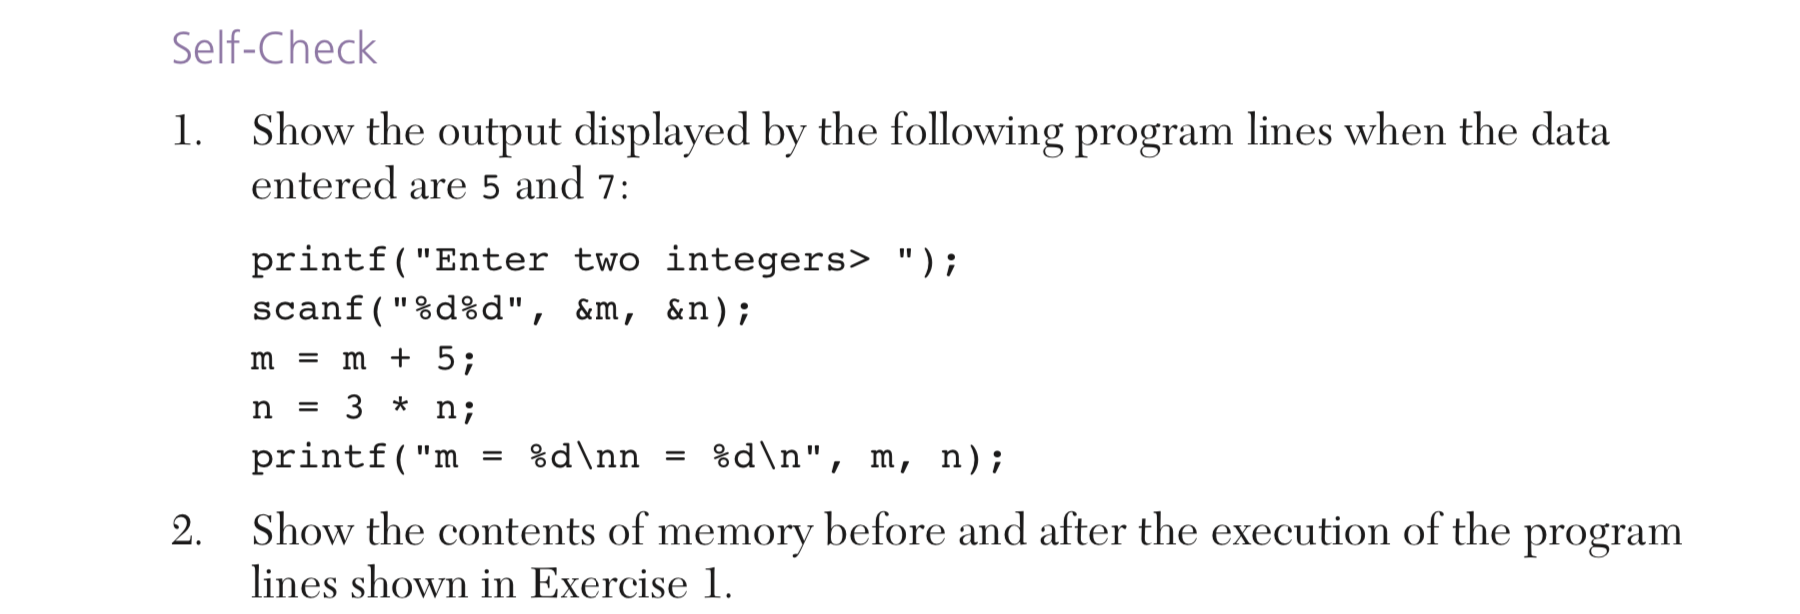 Self-Check
1. Show the output displayed by the following program lines when the data
entered are 5 and 7:
printf("Enter two integers> ");
scanf("%d%d", &m, &n);
m = m + 5;
n;
%d\n", m, n);
%d\nn
printf("m
Show the contents of memory before and after the execution of the program
lines shown in Exercise 1.
2.
